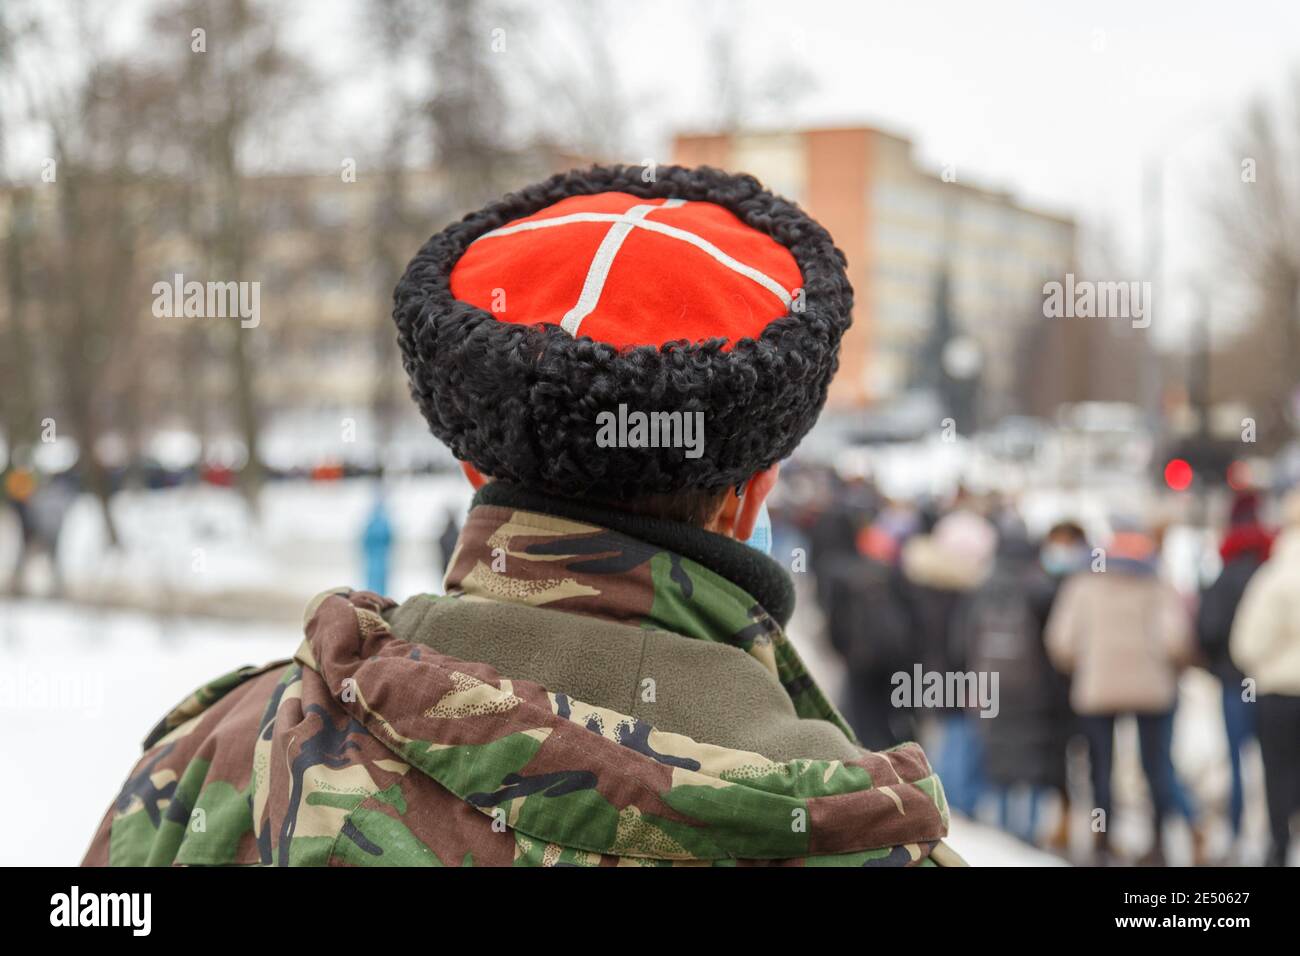 man in camouflage jacket and cossack hat with white cross on red watching blurry crowd of people - view from back. Stock Photo